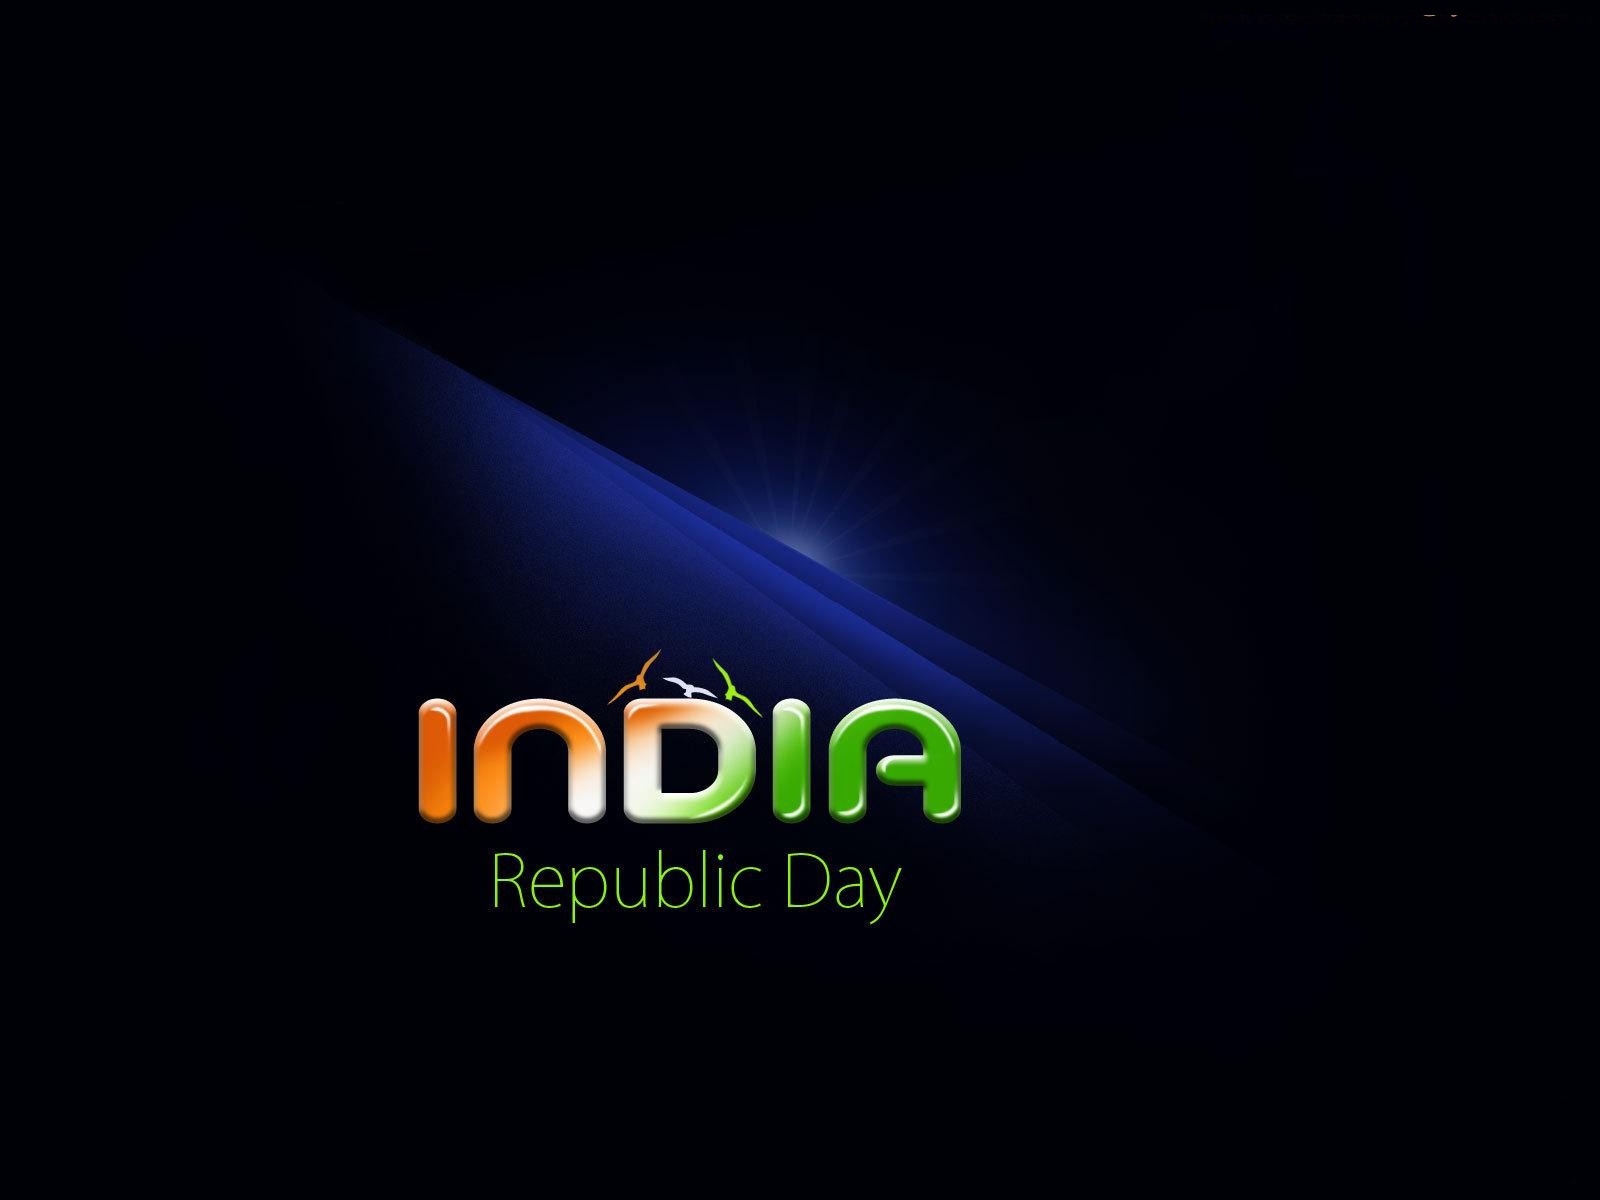 Indian Republic Day 2016